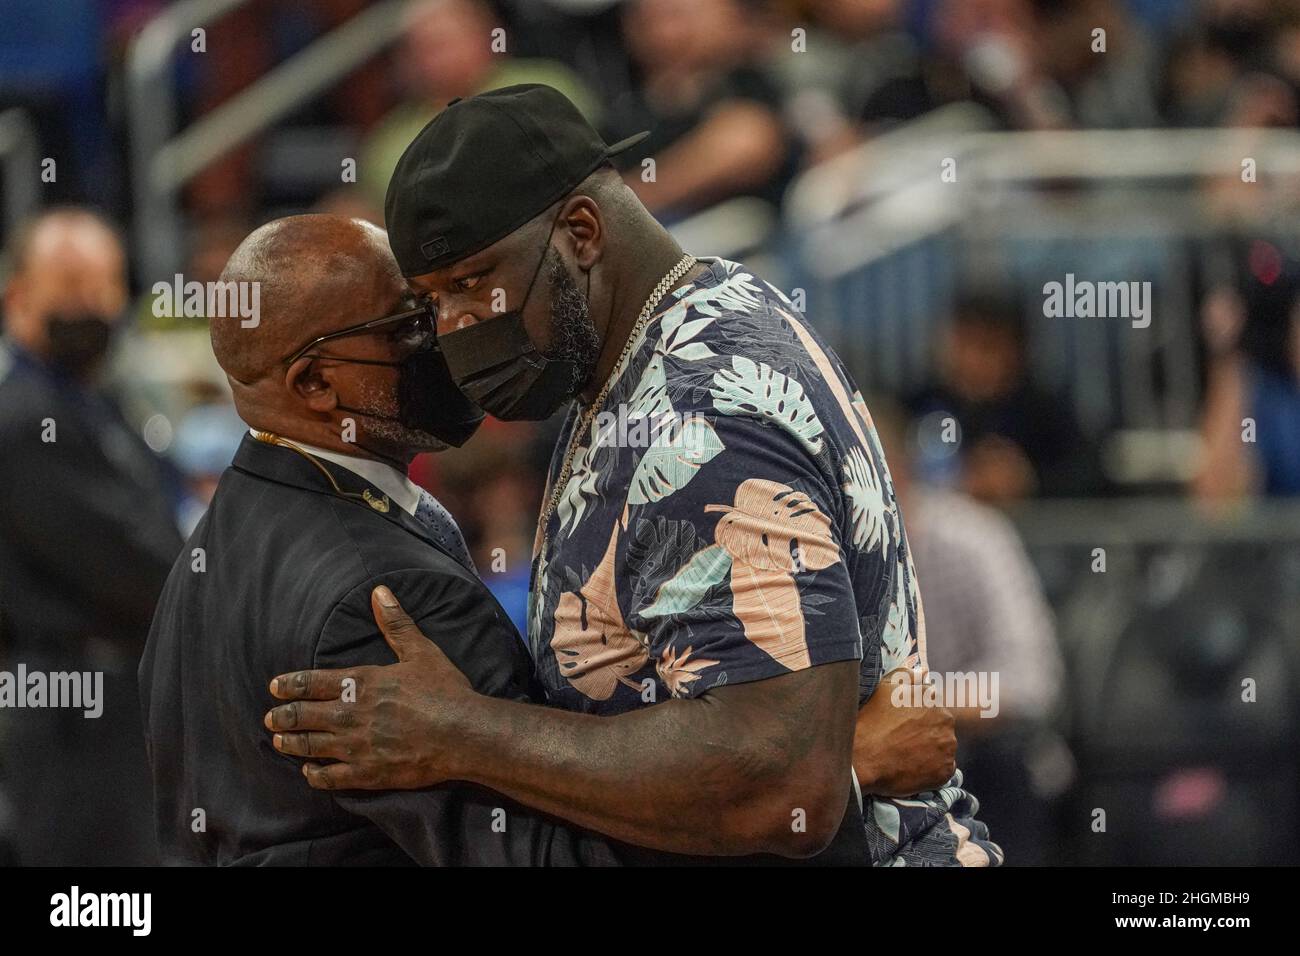 Shaquille o'neal orlando hi-res stock photography and images - Alamy